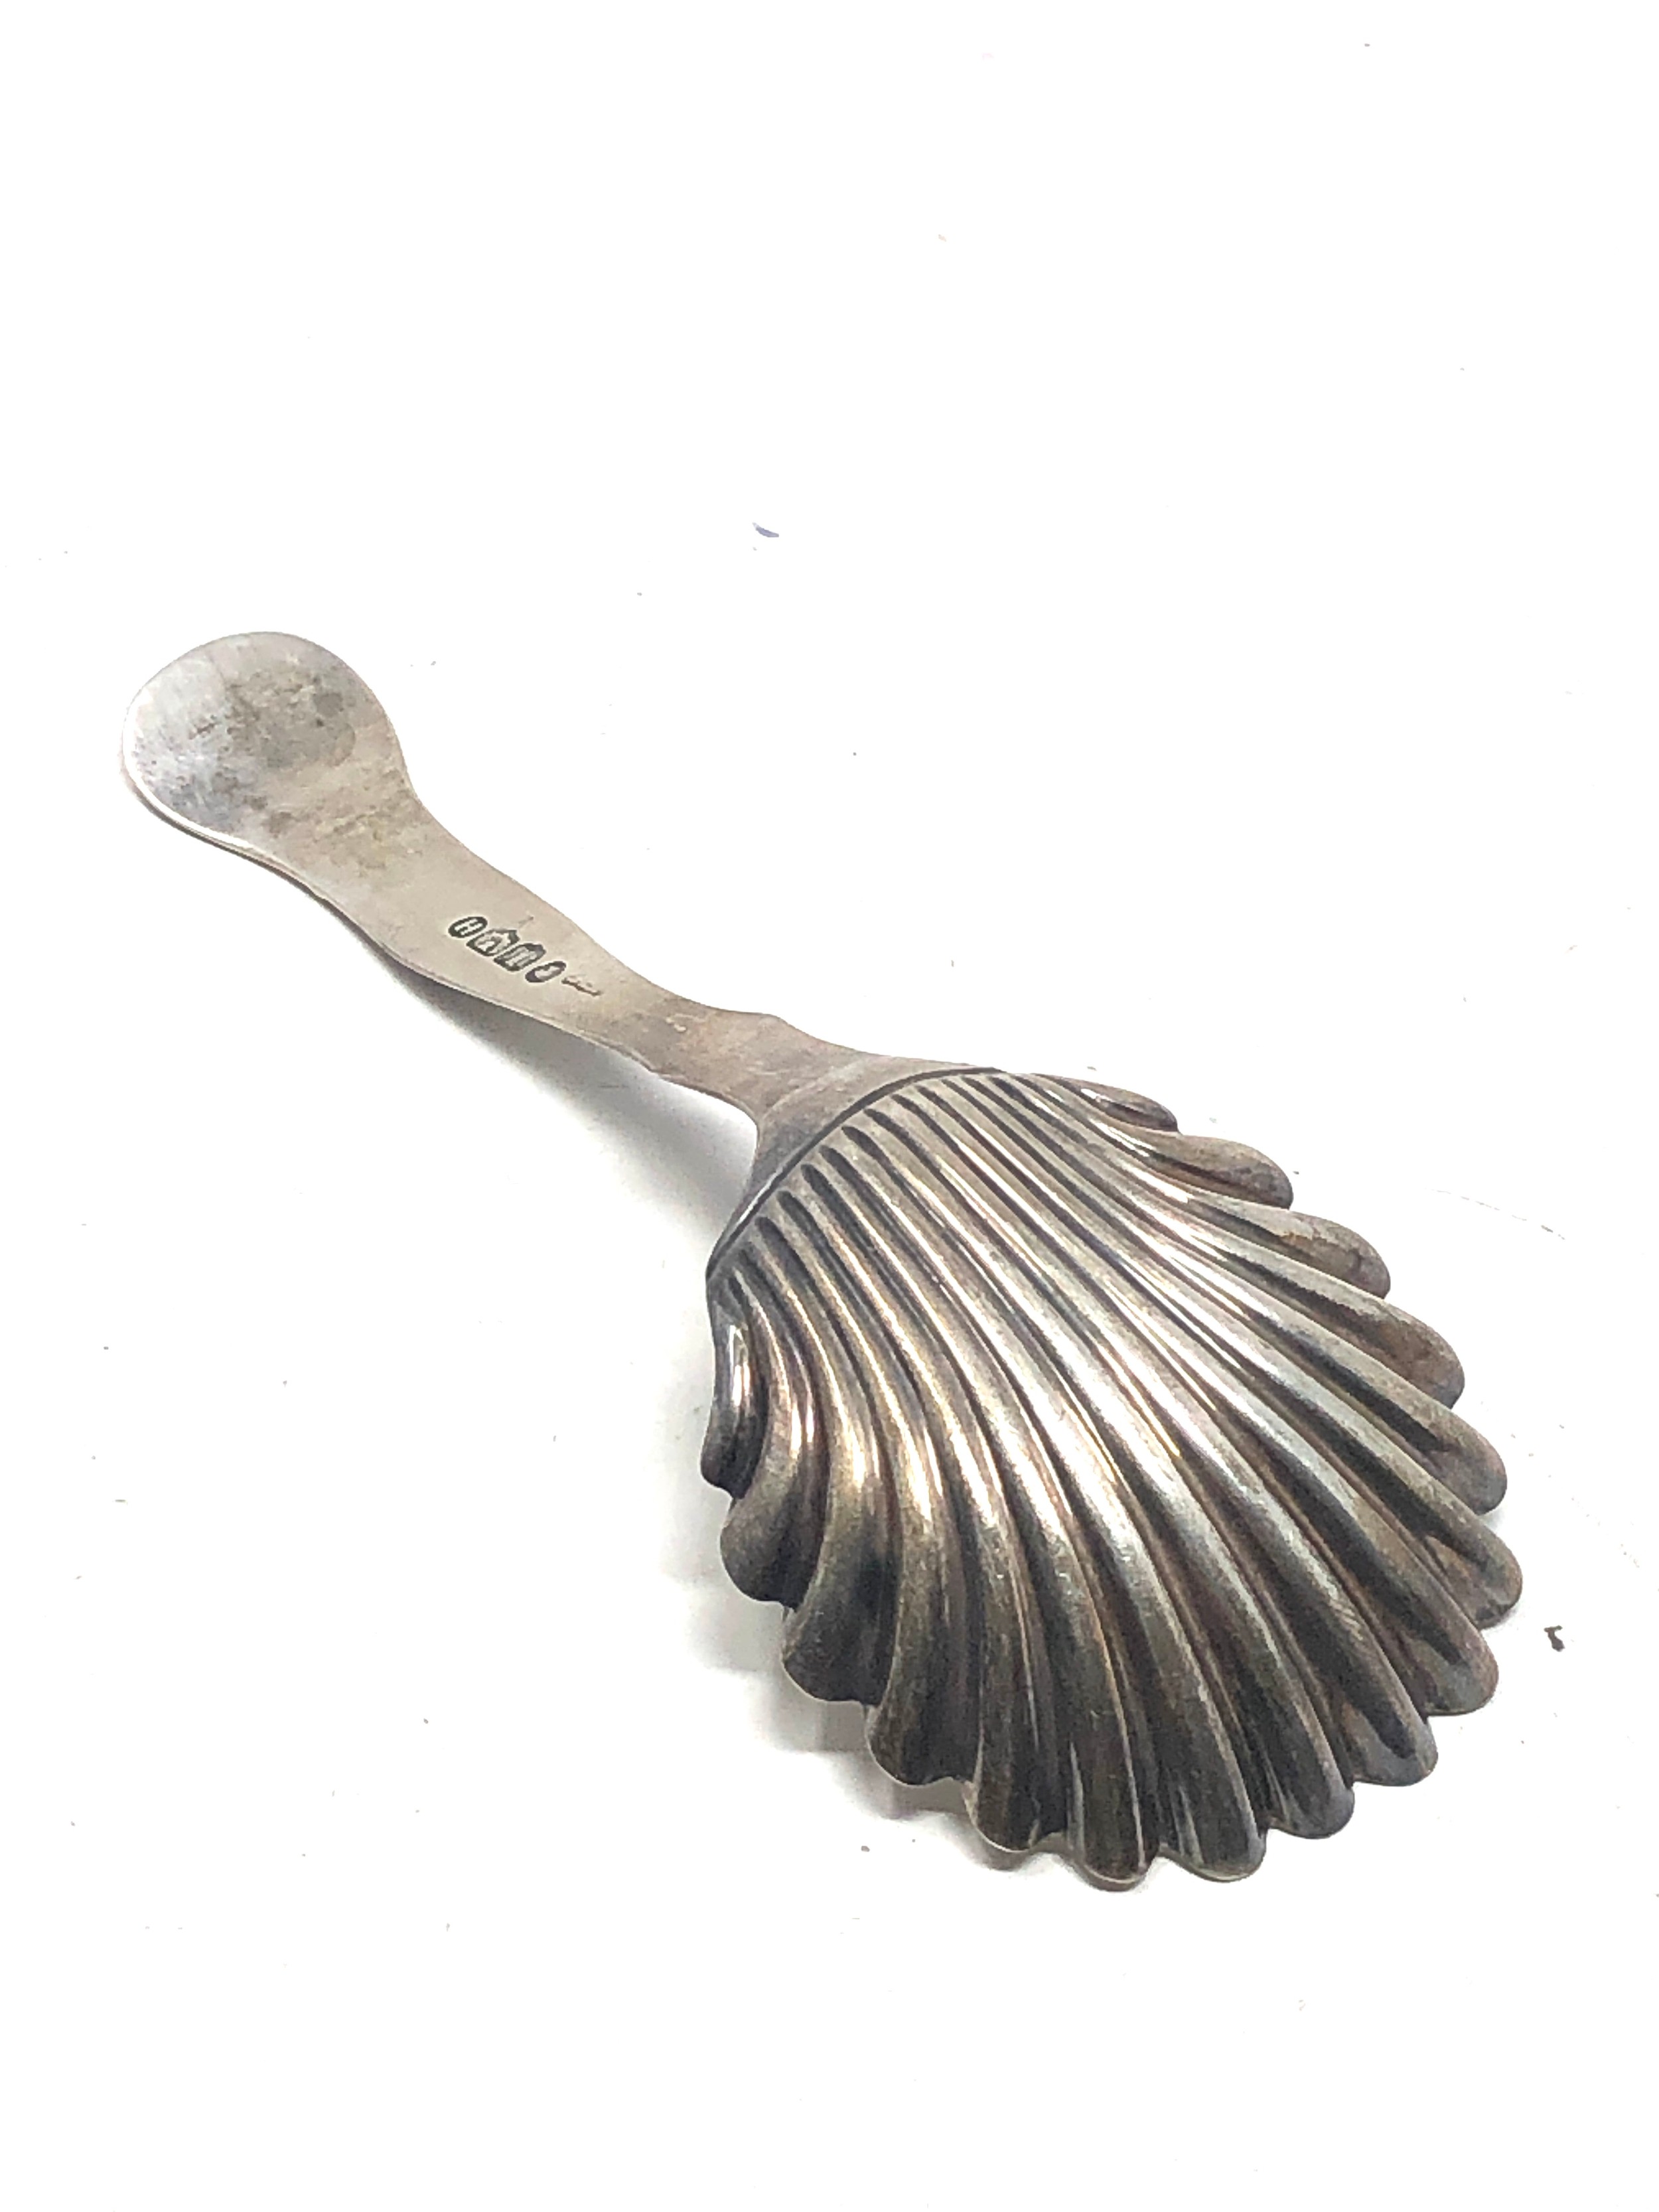 Antique scottish silver tea caddy spoon - Image 3 of 4